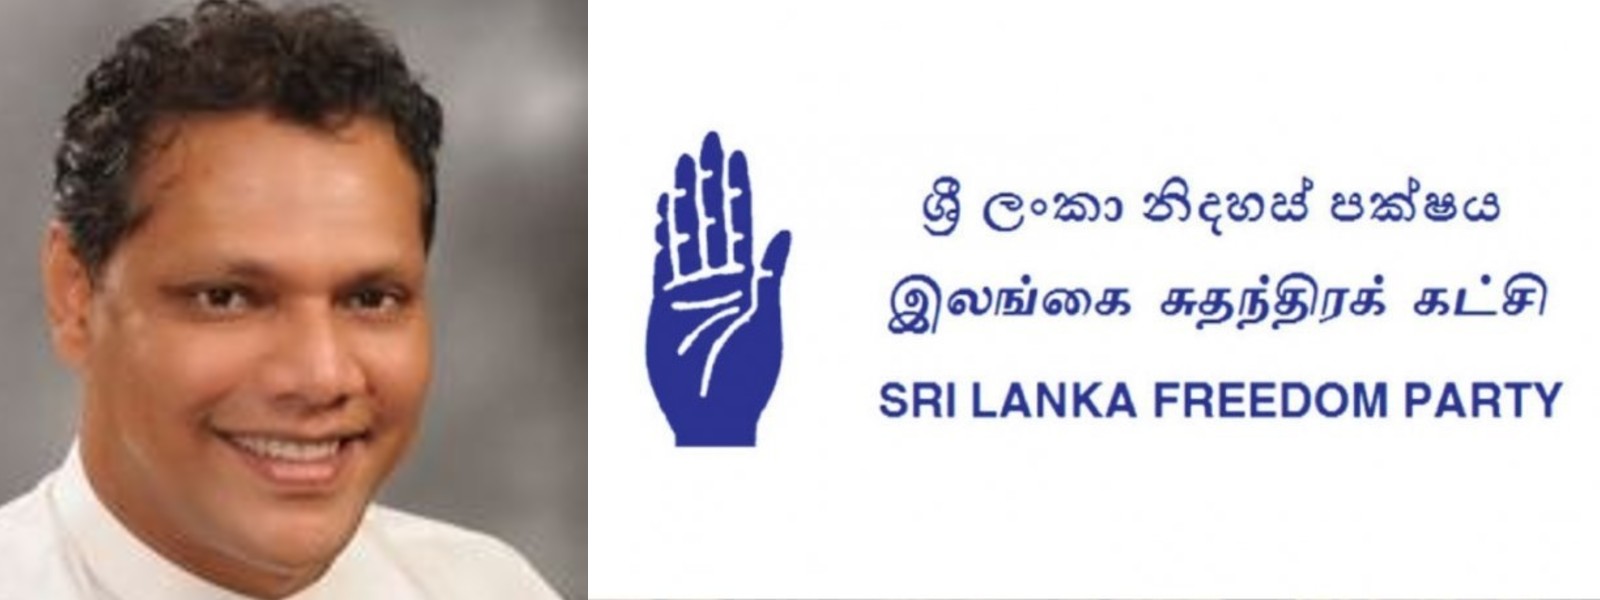 SLFP in a state of disappointment; says General Secretary